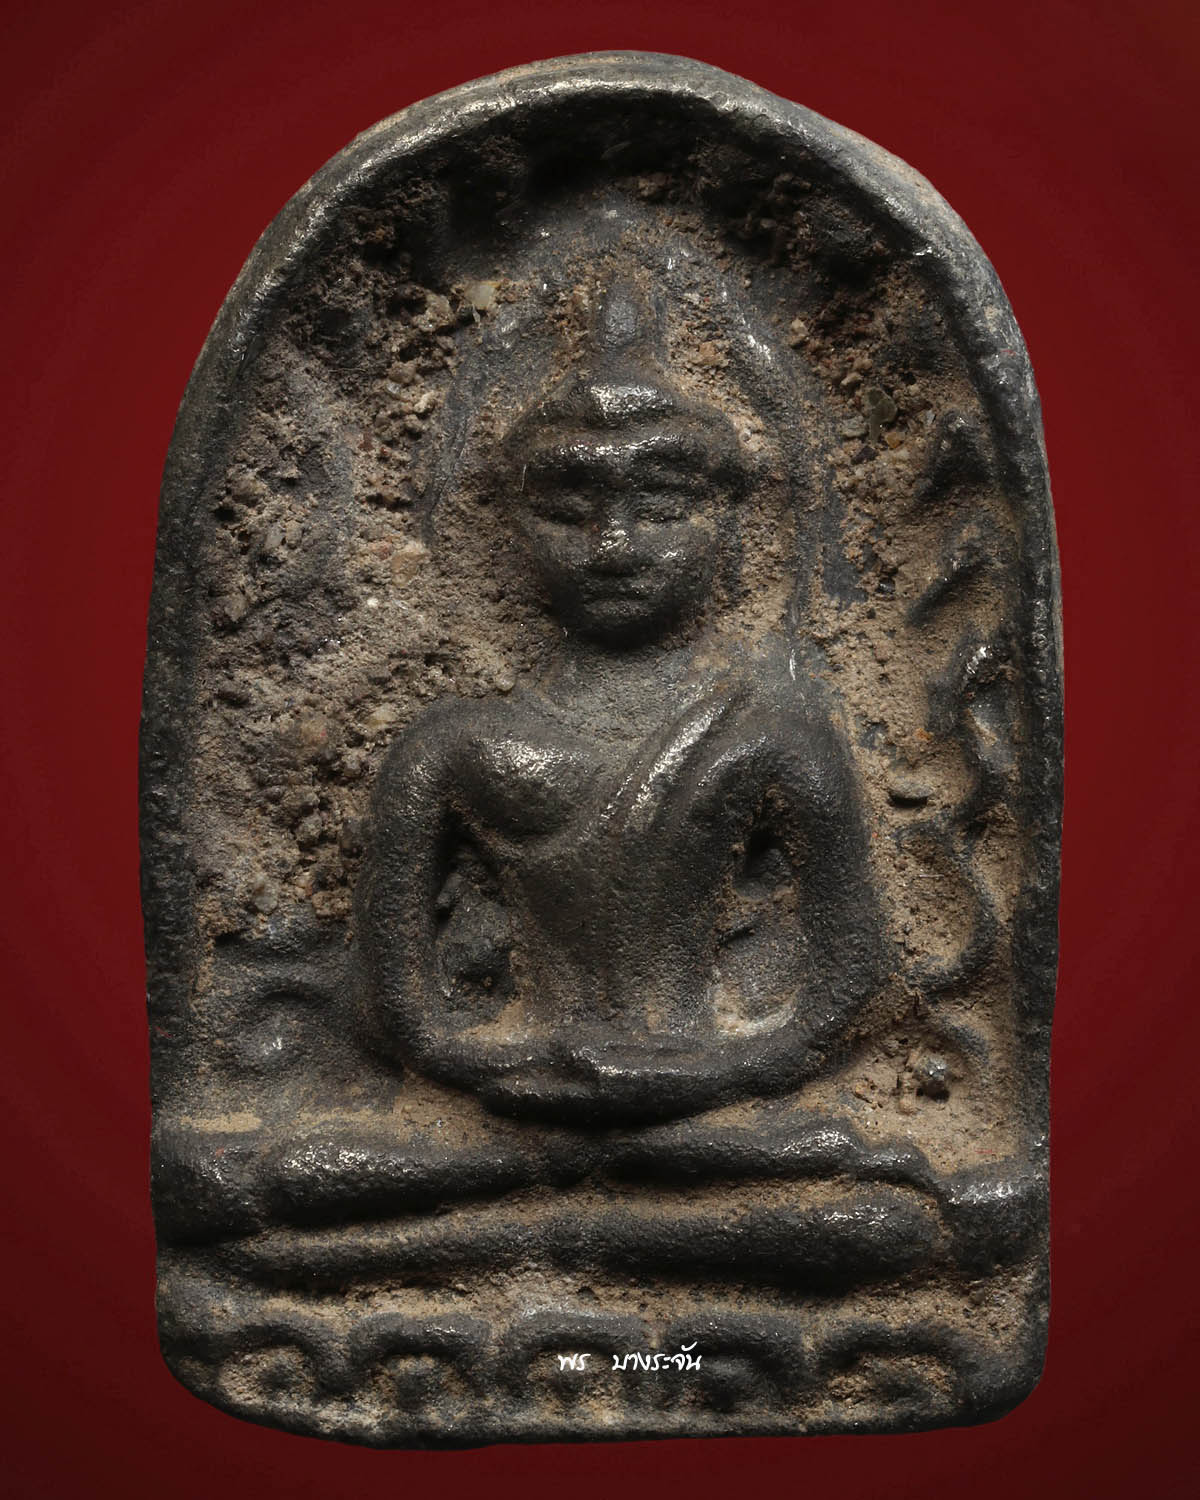 Phra Somkor were first discovered on B.E. 2392 in Wat Phra Boromathat. Gumpangpeth province.